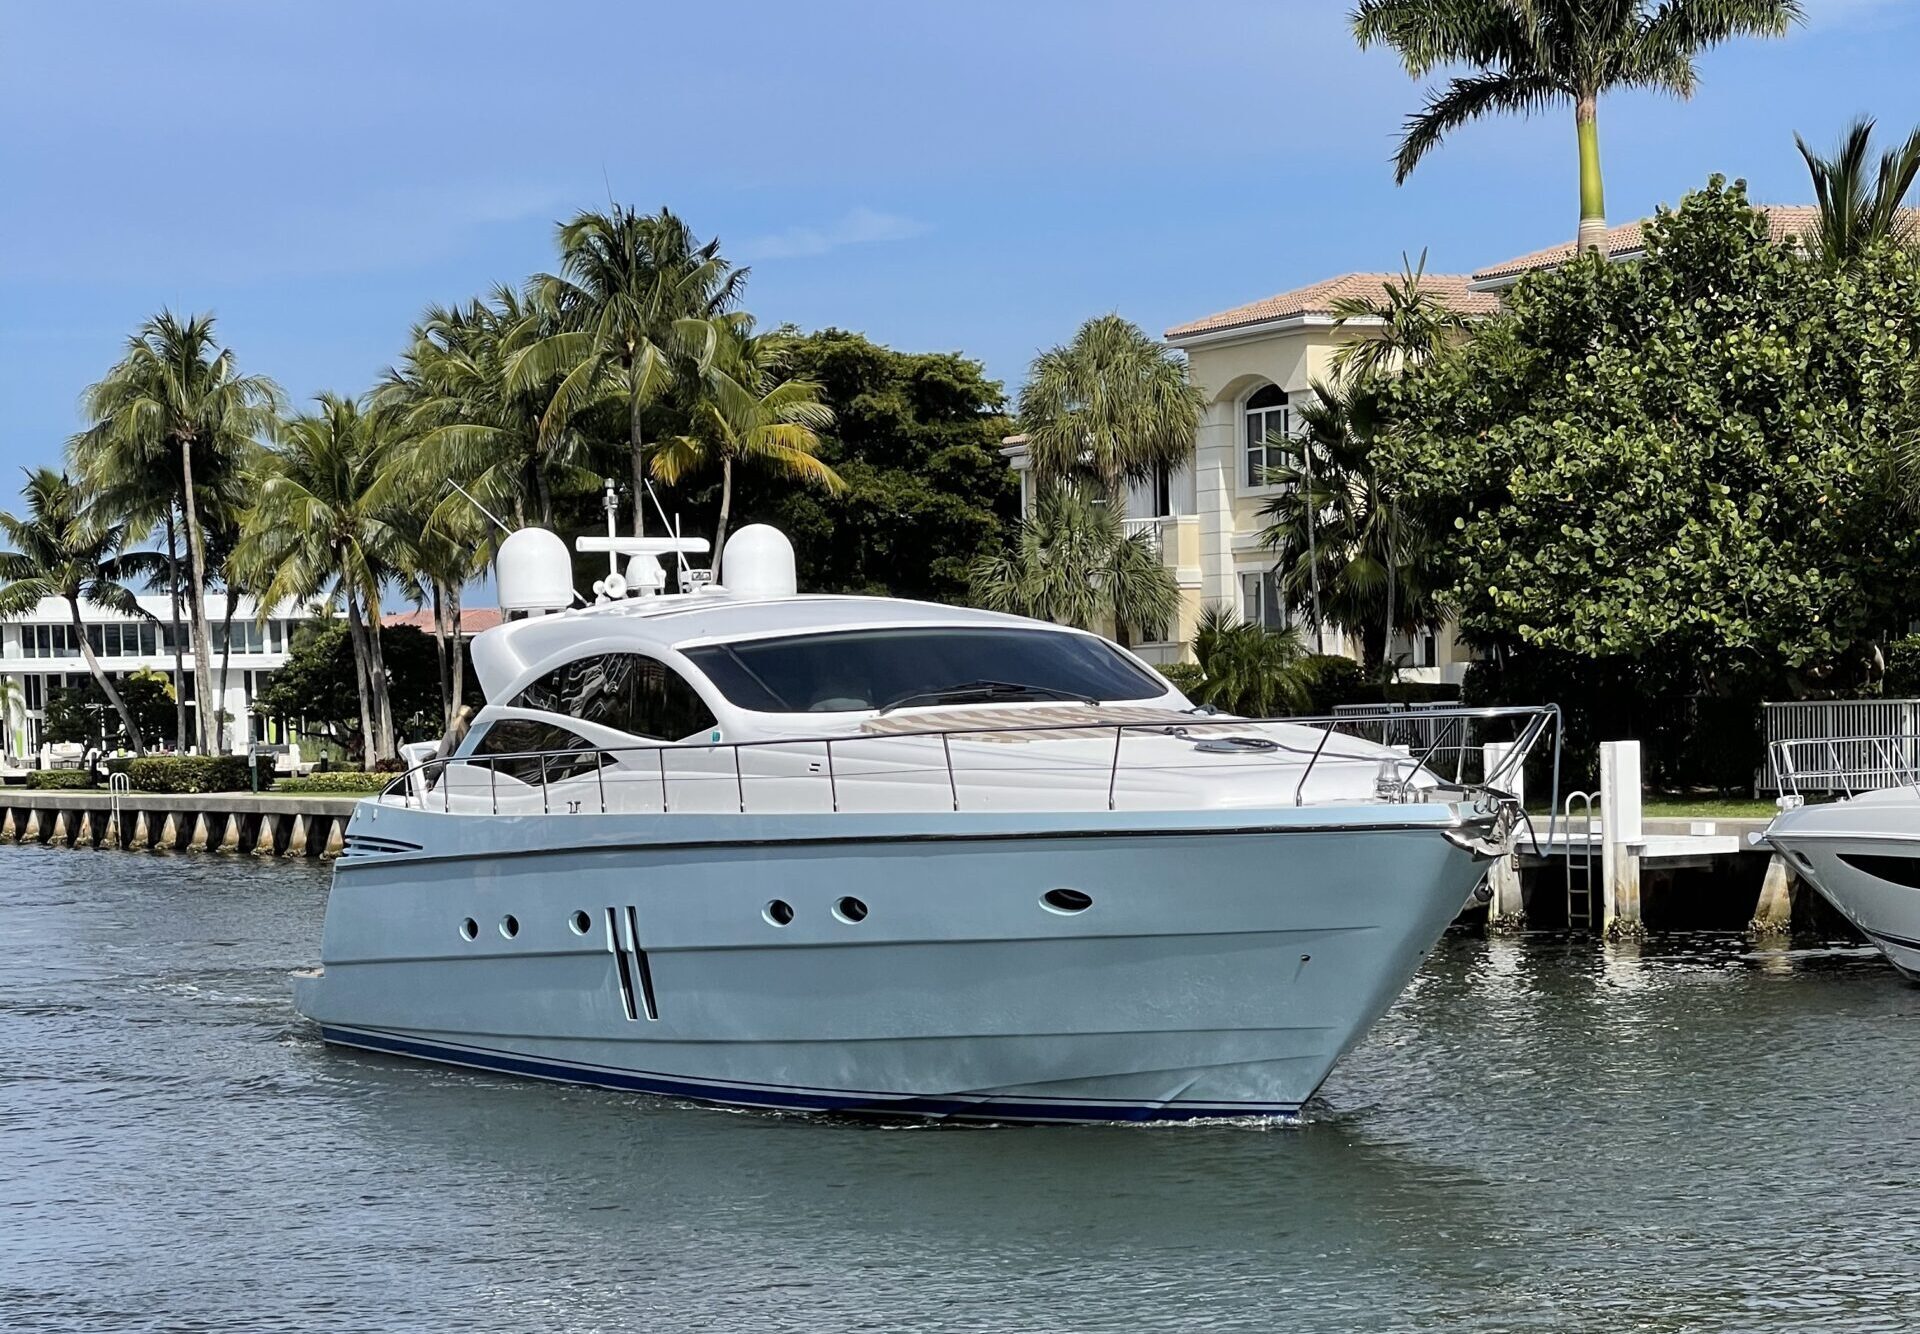 62' Pershing south florida yacht charters South Florida Yacht Charters